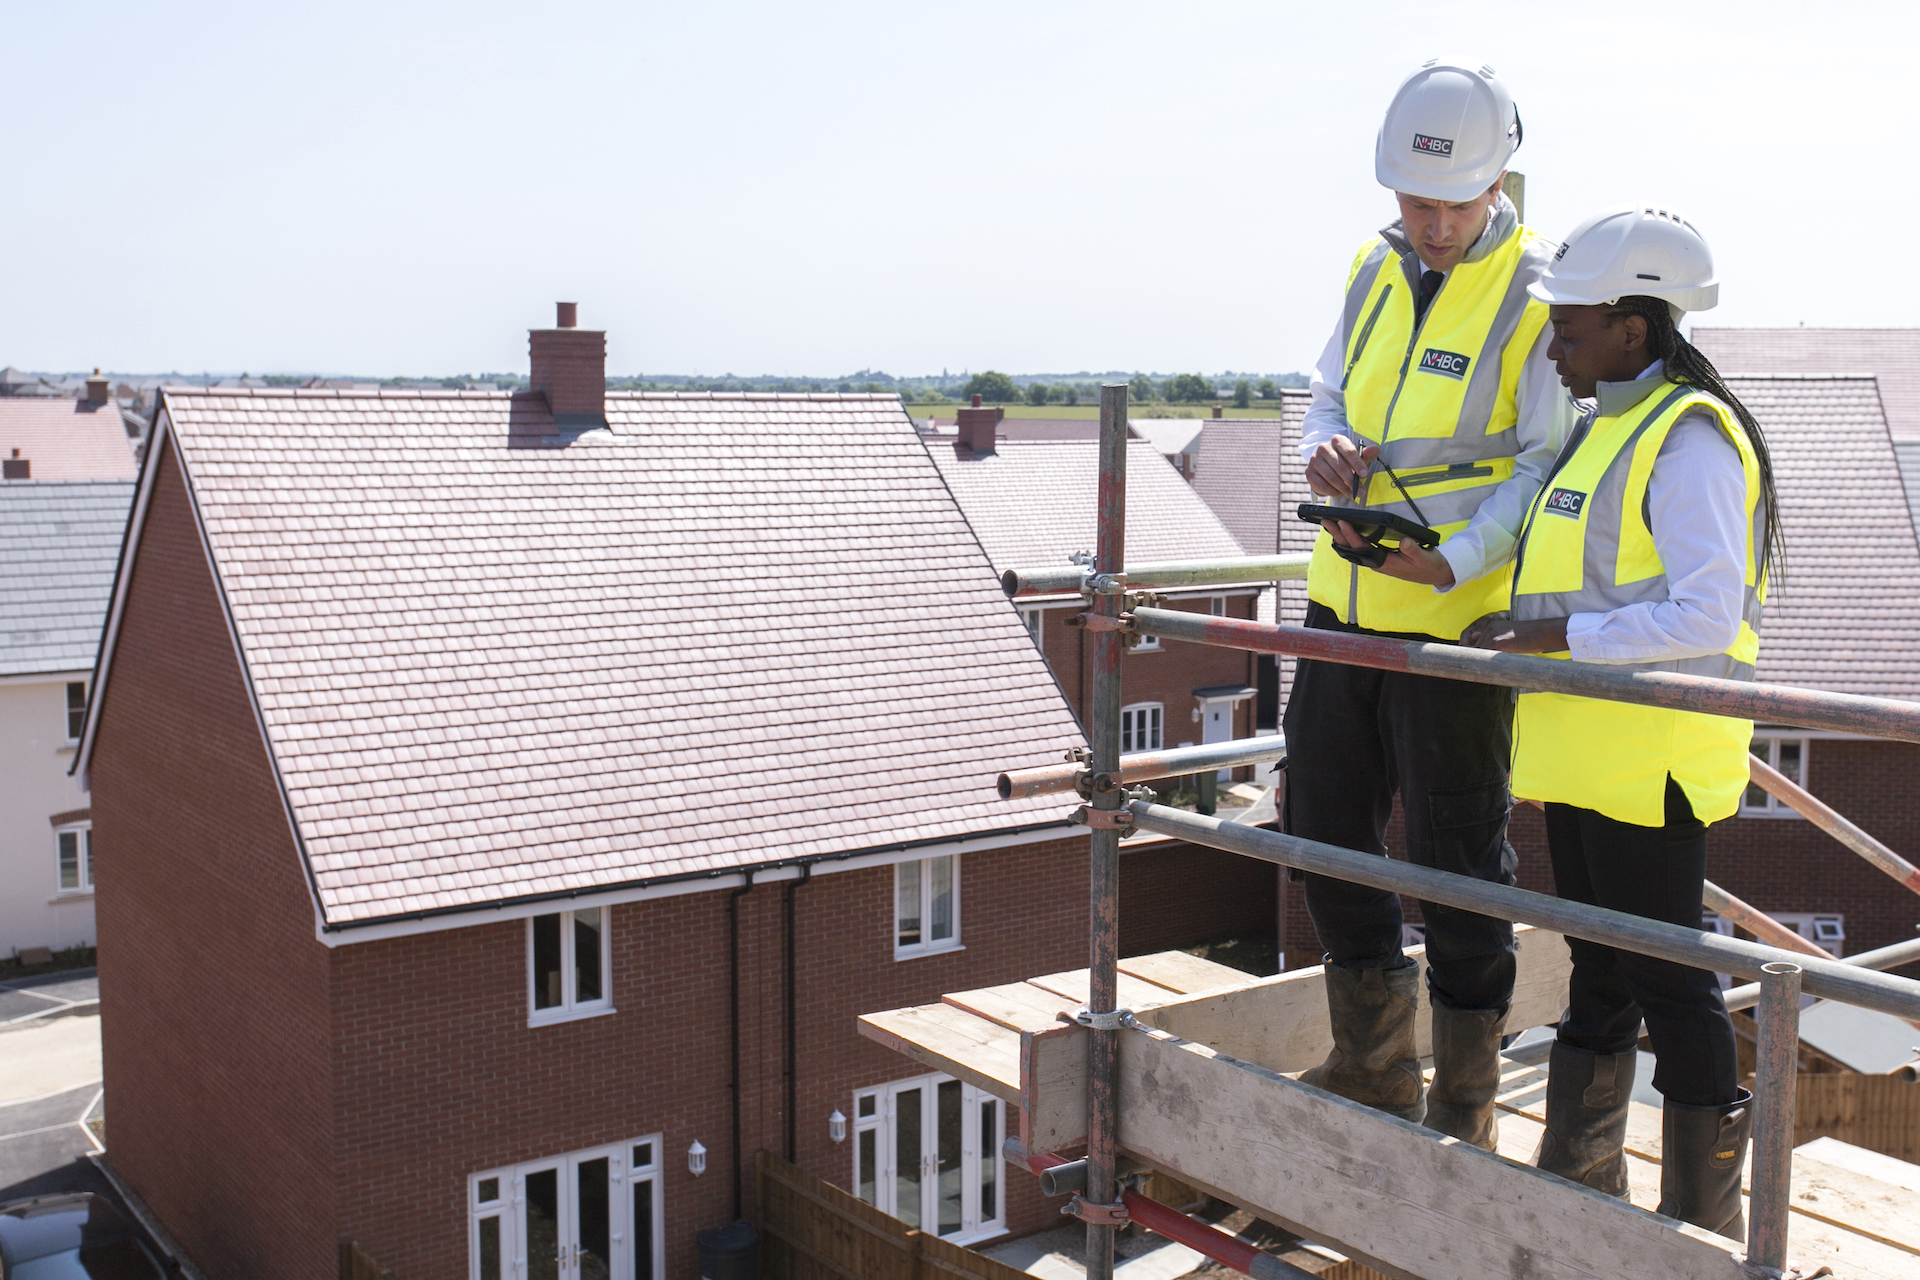 a photo of two people in site safety clothing viewing a site from some scaffolding